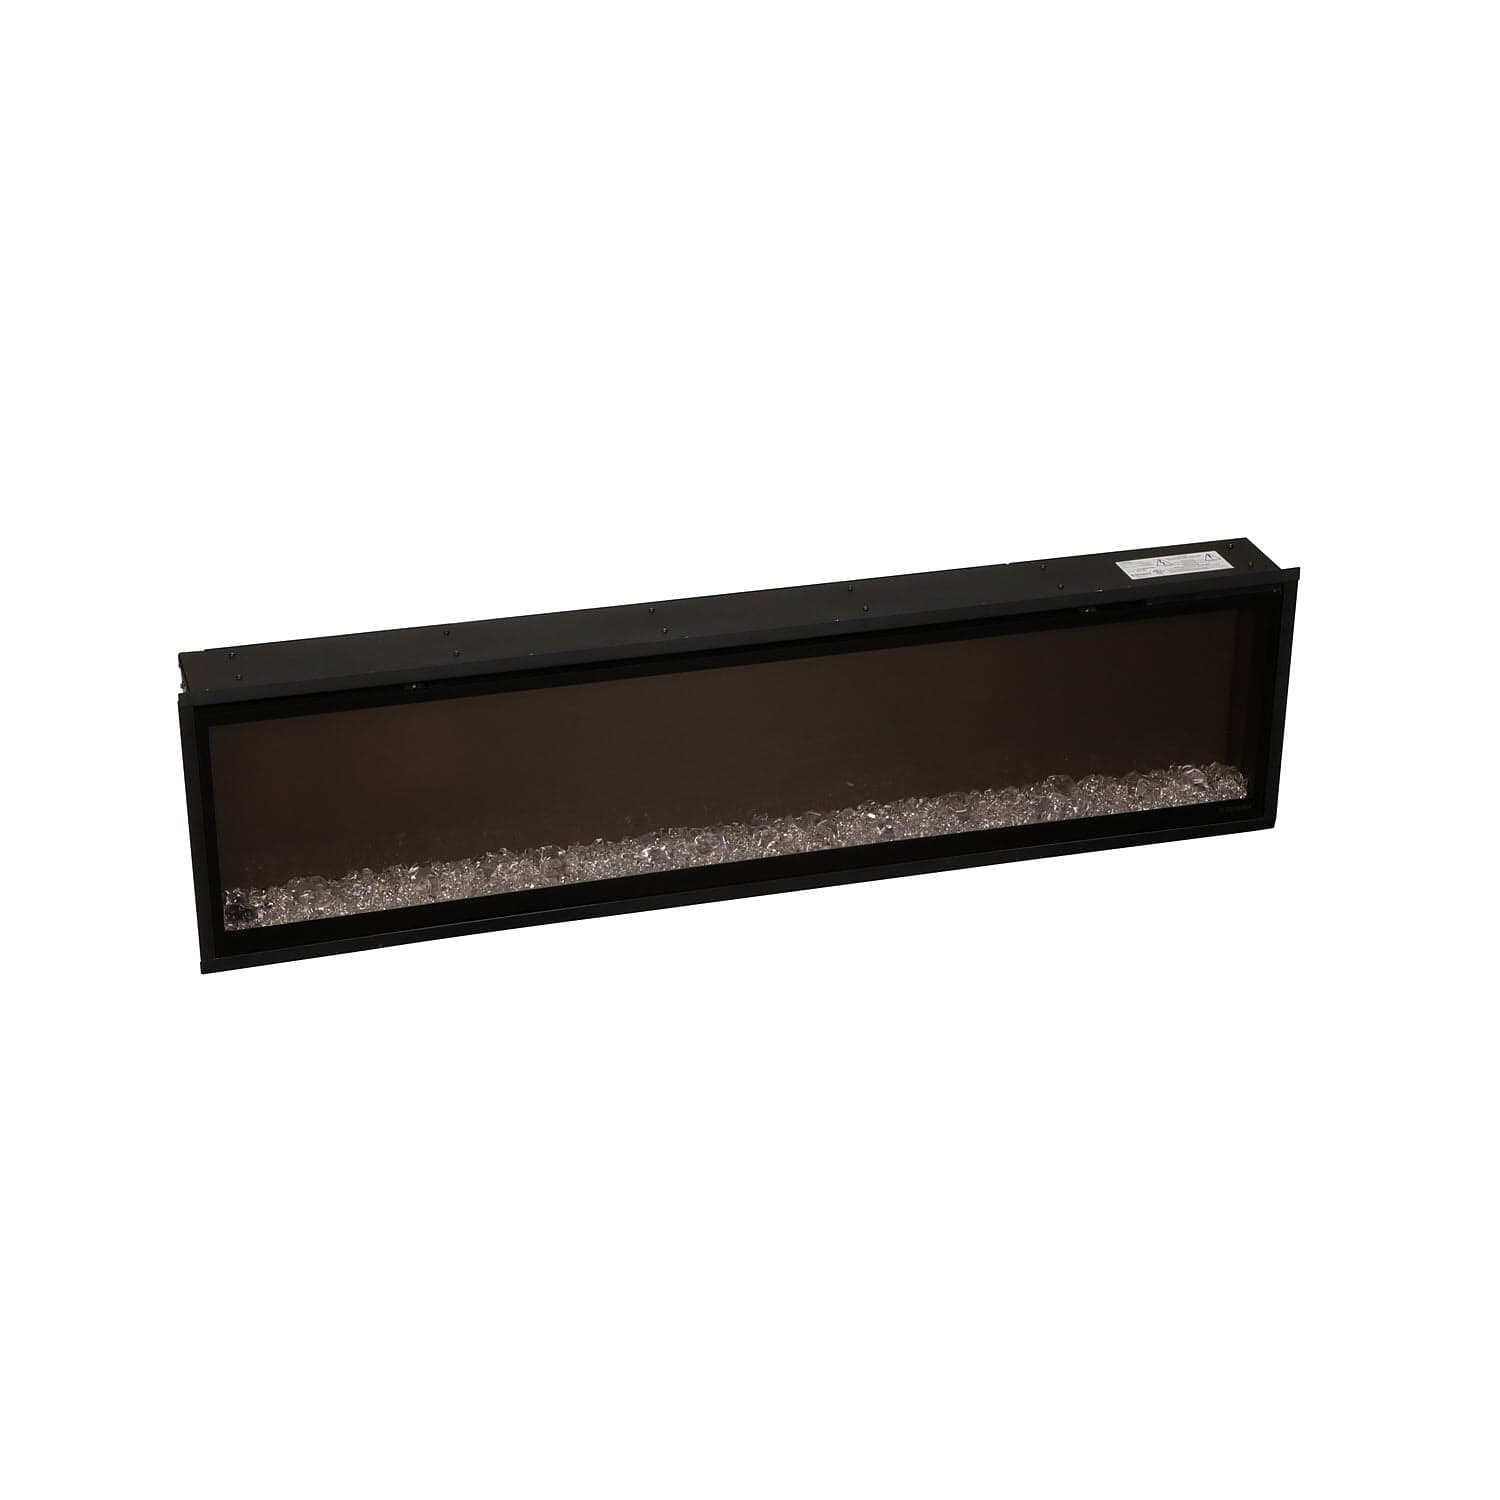 StarWood Fireplaces - Dimplex IgniteXL Built-in Linear Electric Fireplace 74-Inch -